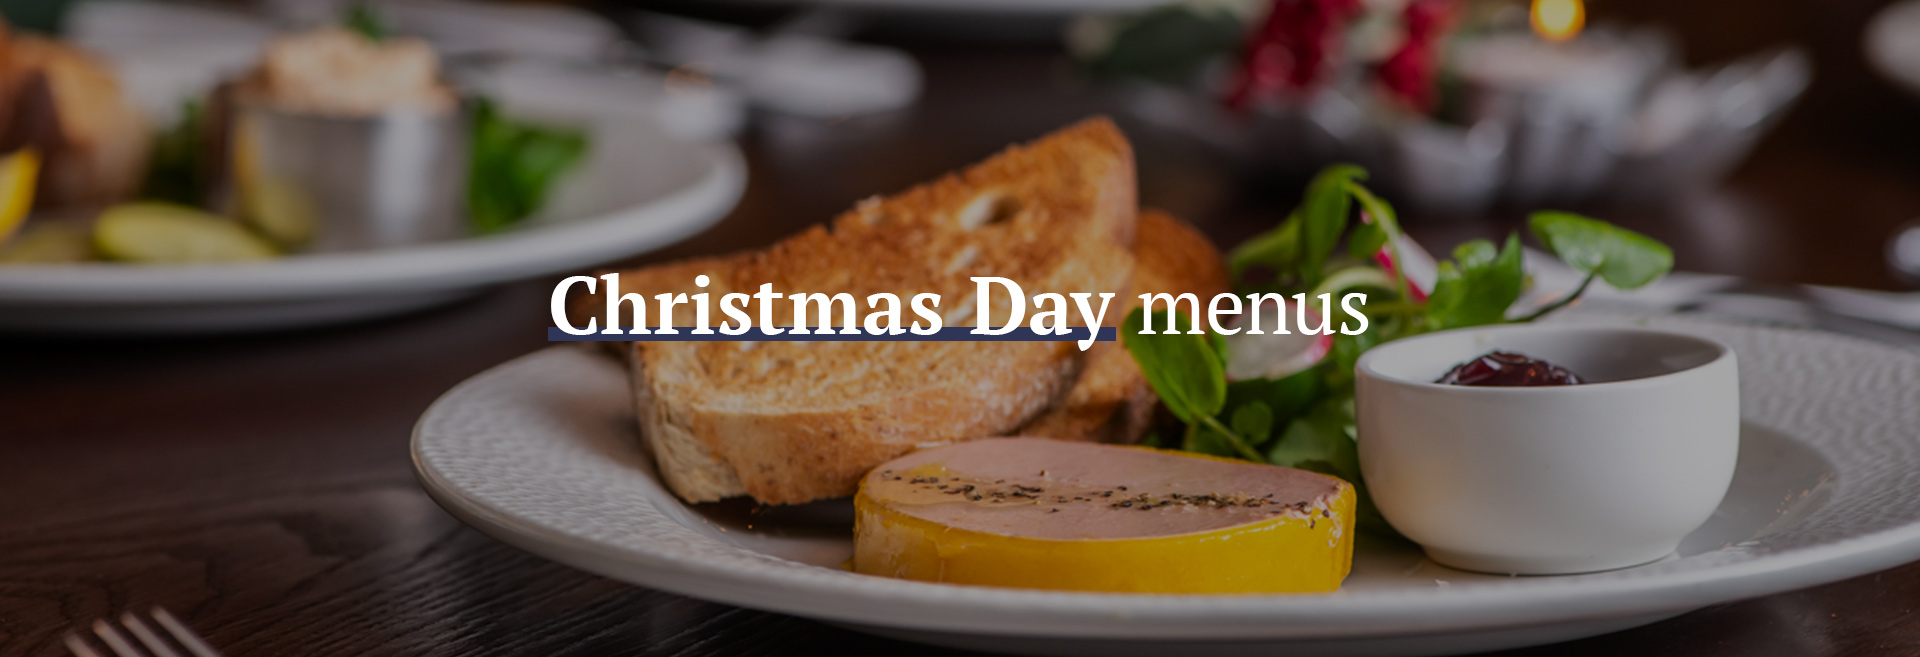 Christmas Day Menu at The White Horse